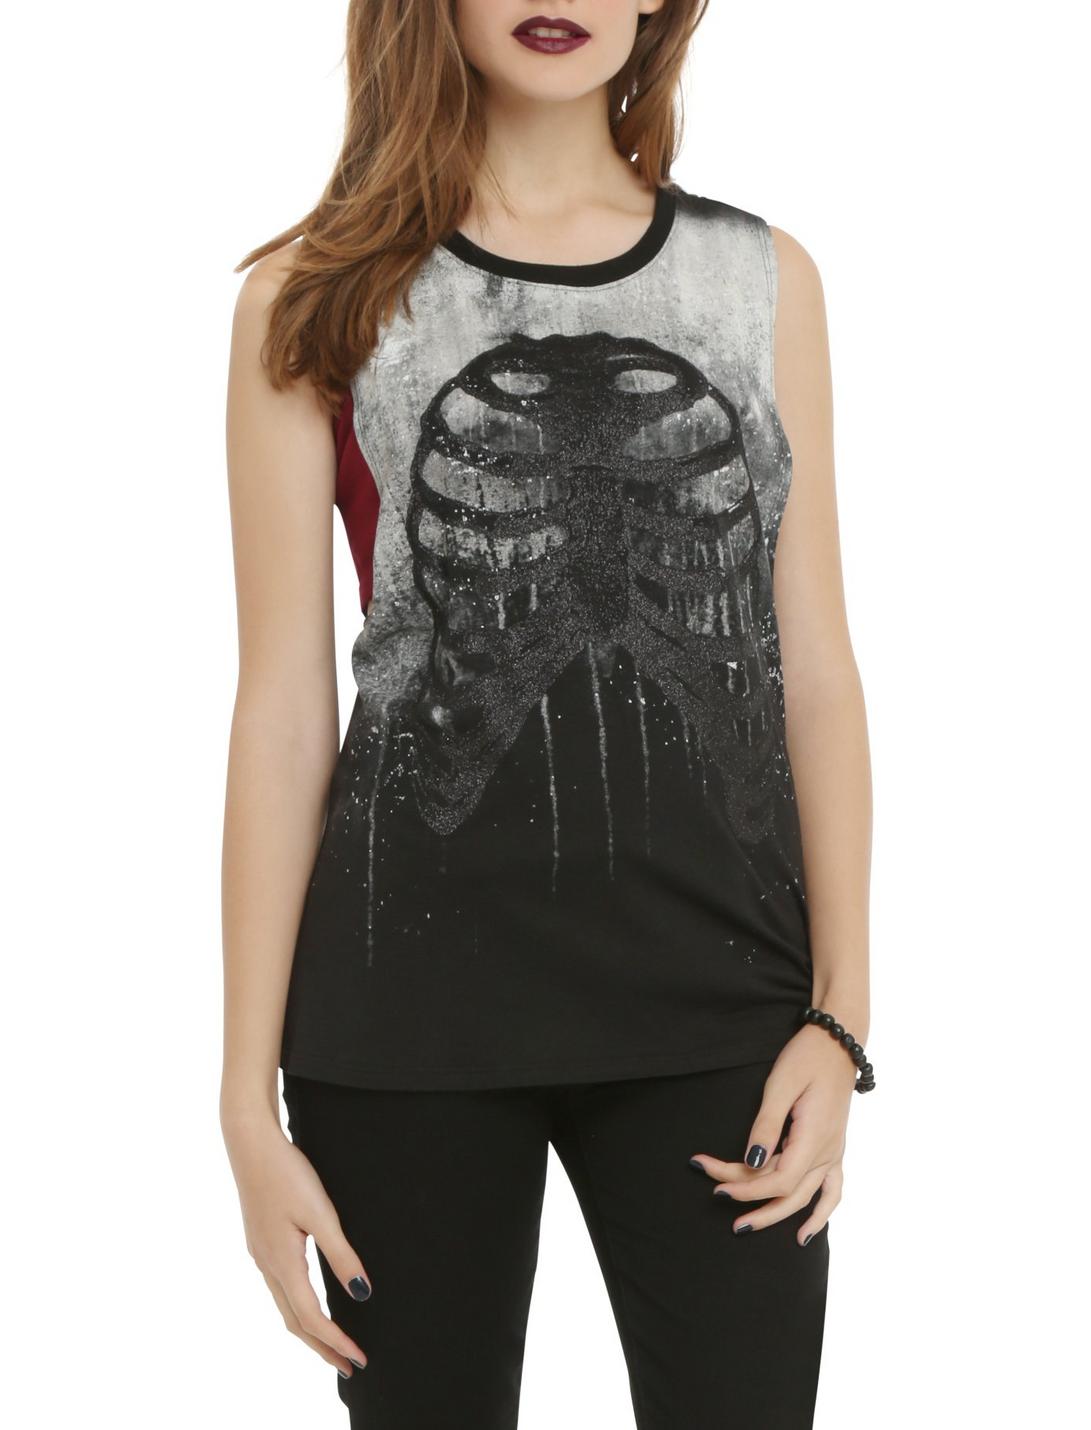 Dripping Rib Cage Girls Muscle Top, BLACK, hi-res